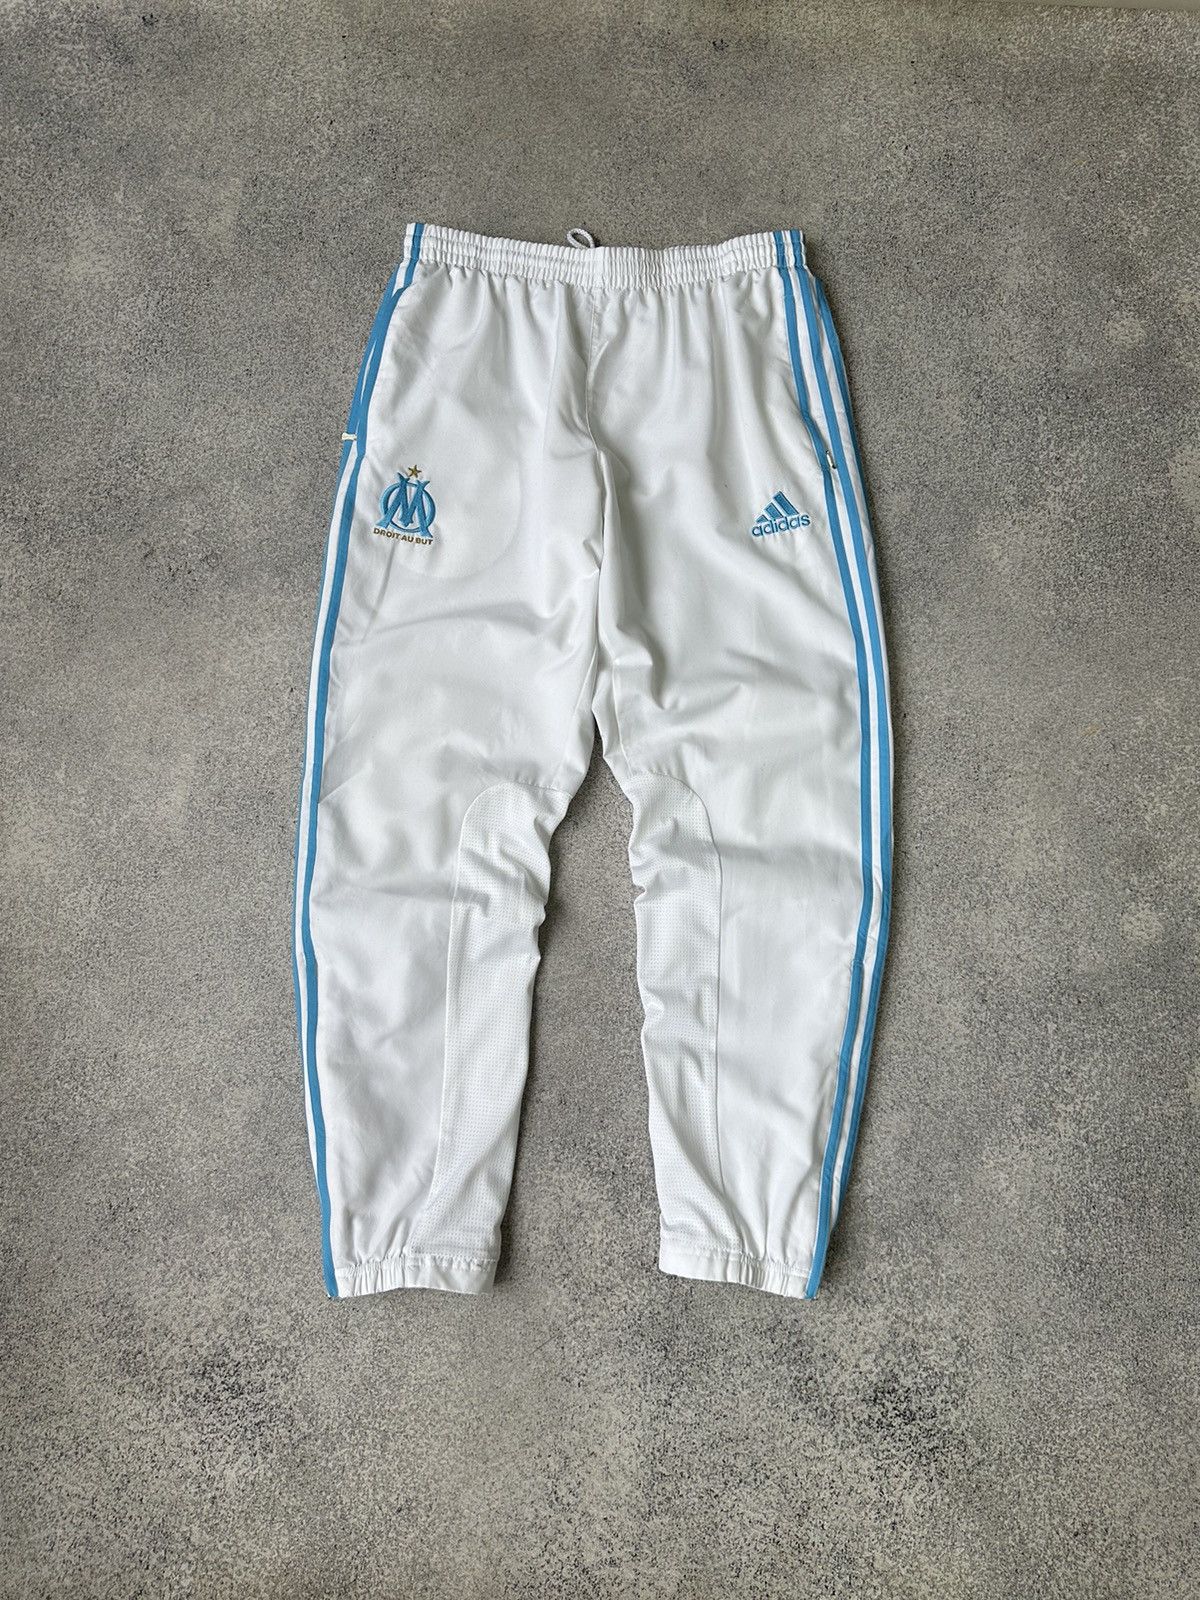 Pre-owned Adidas X Vintage Adidas Olympic De Marseille White Football Style Trackpants